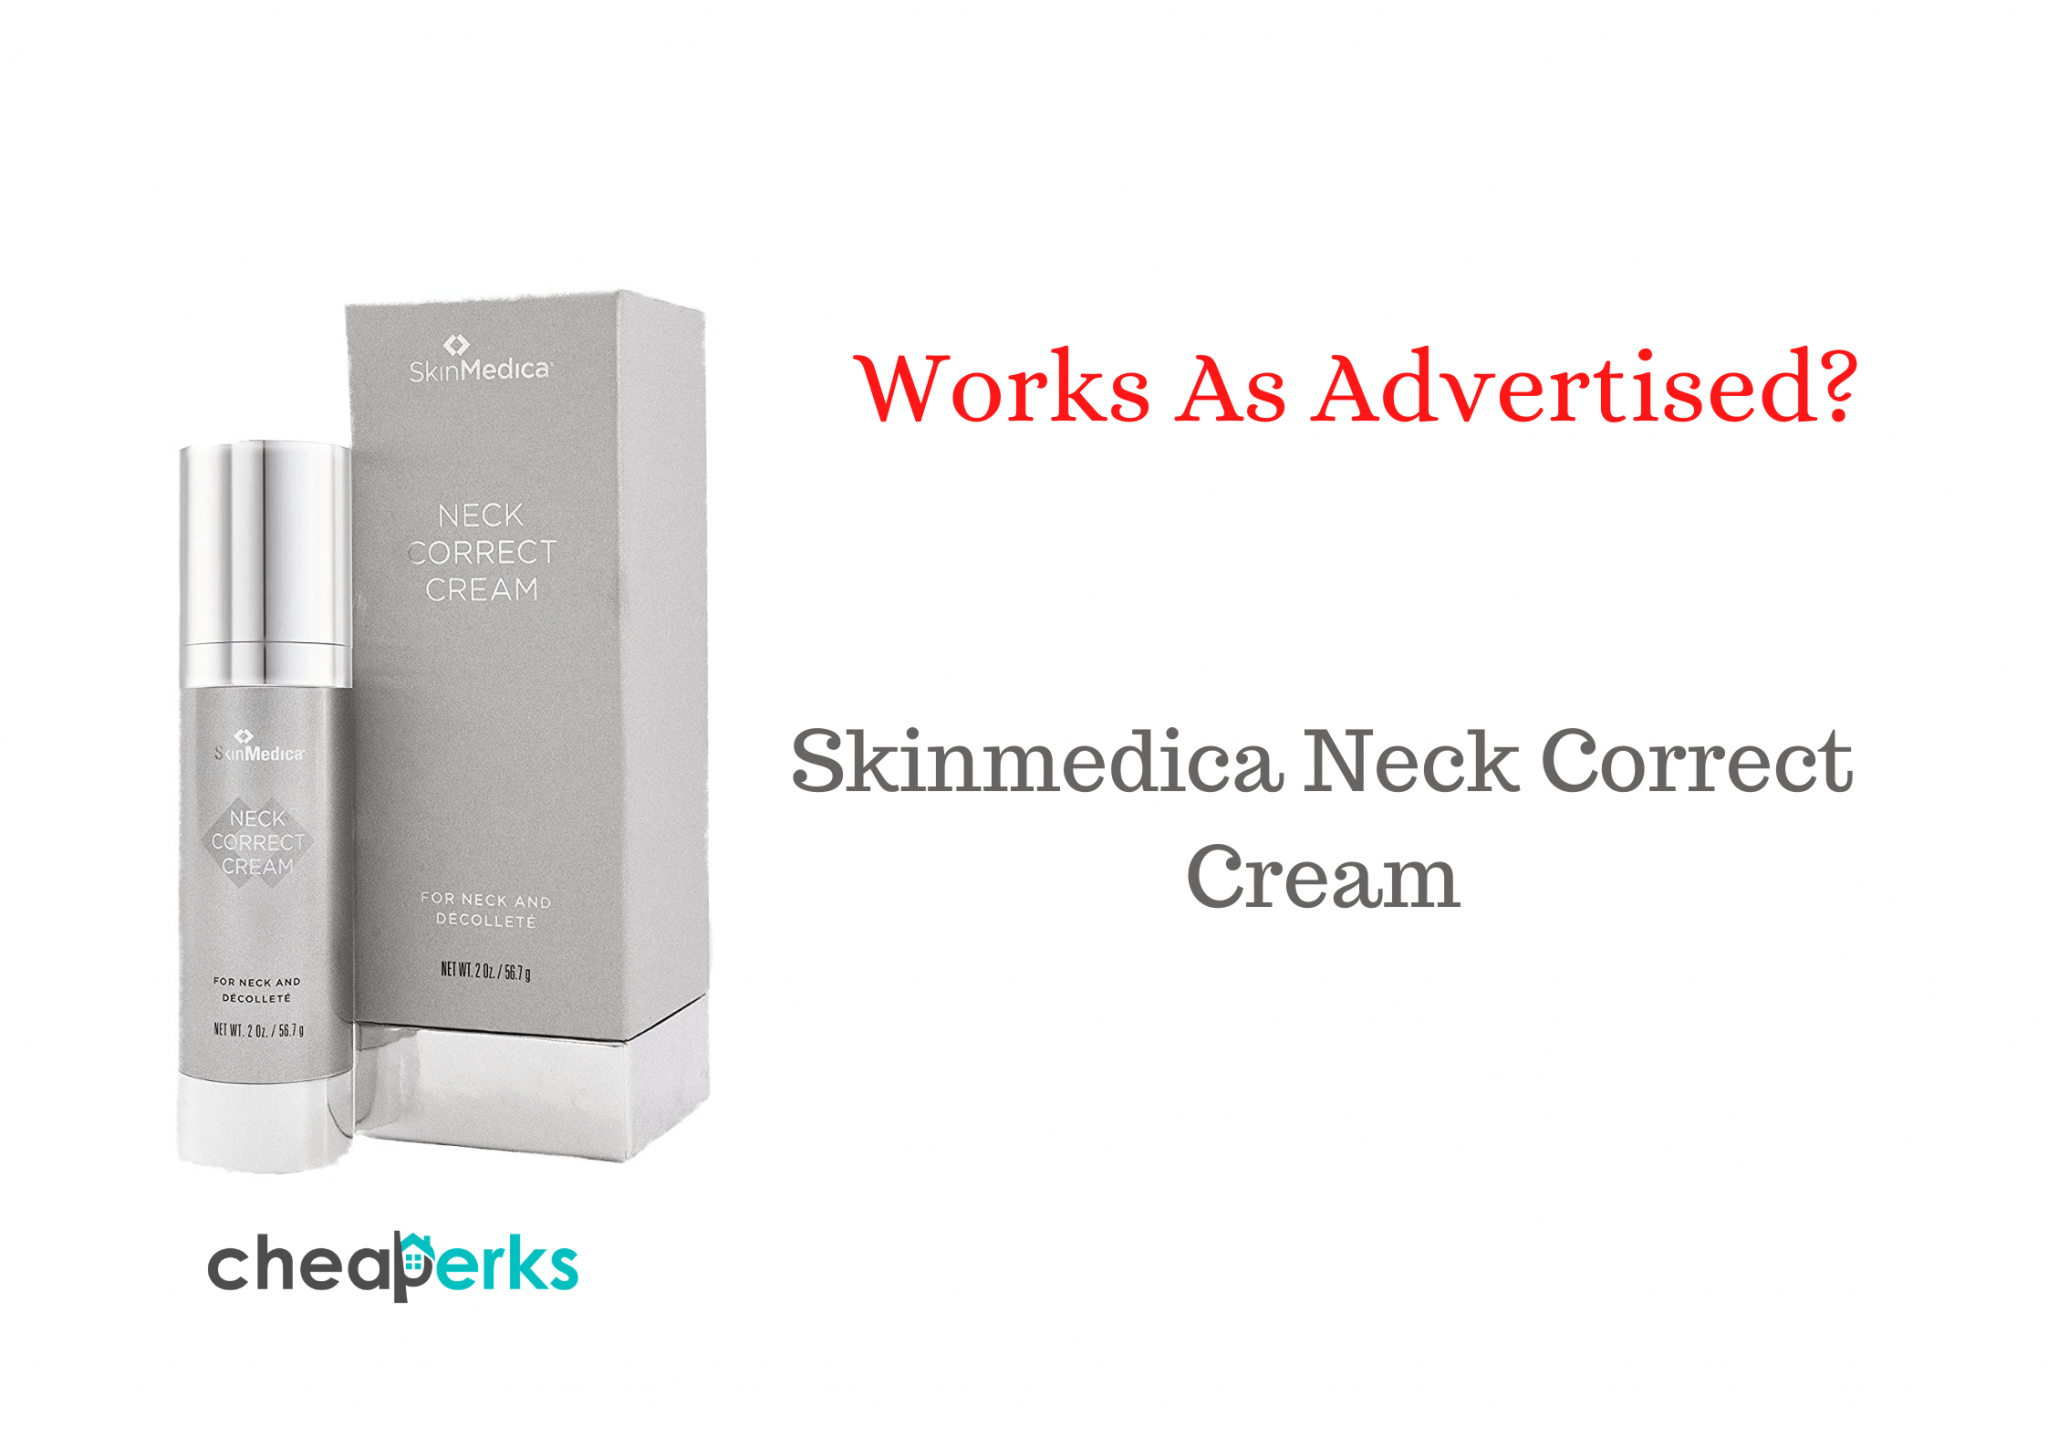 Skinmedica Neck Correct Cream Reviews | Works As Advertised? - Cheaperks